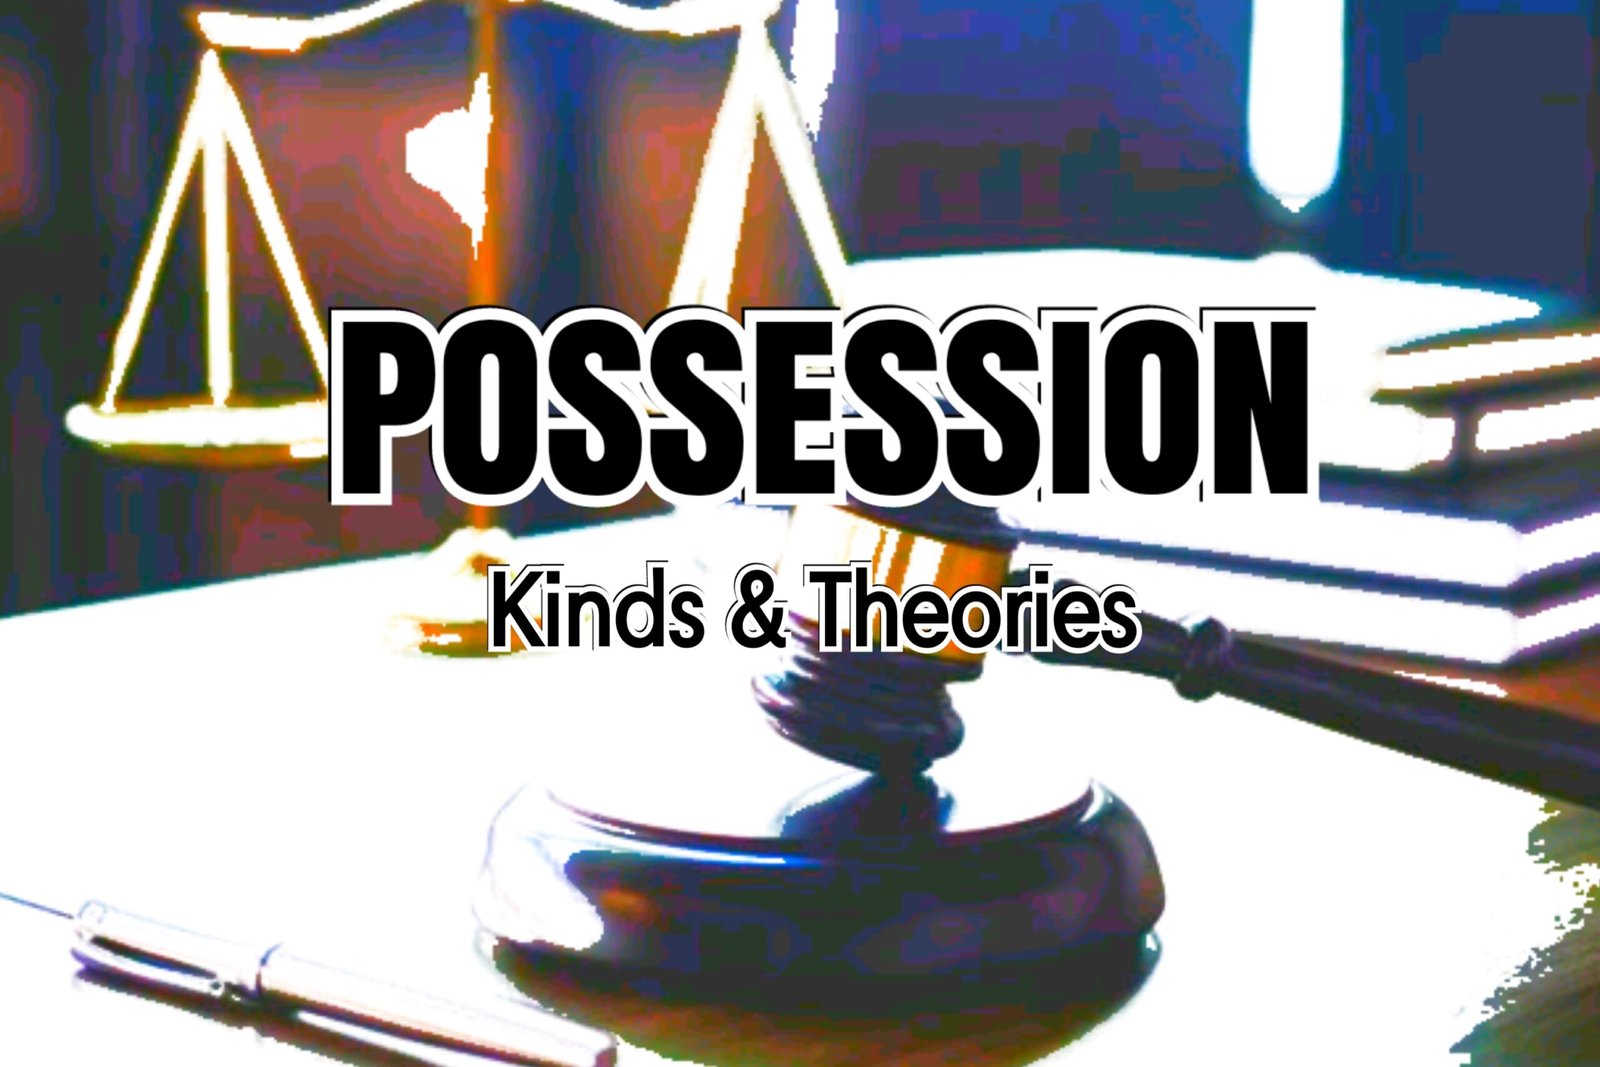 possession-kind-of-possession-theories-of-possession-legal-vidhiya